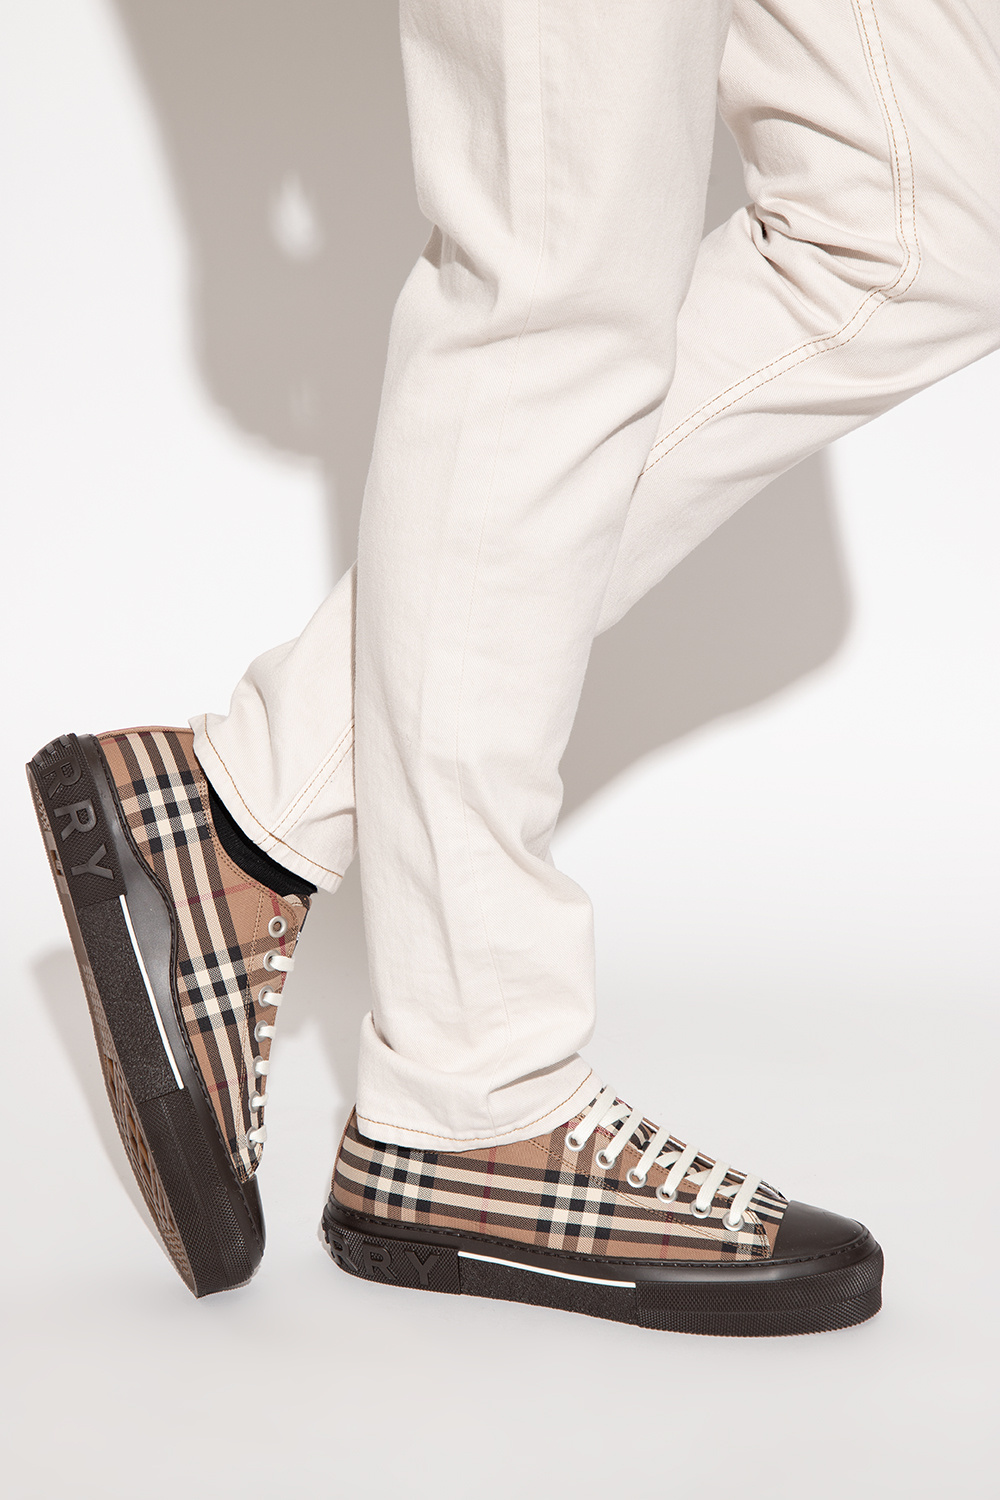 burberry Continental ‘Jack’ sneakers